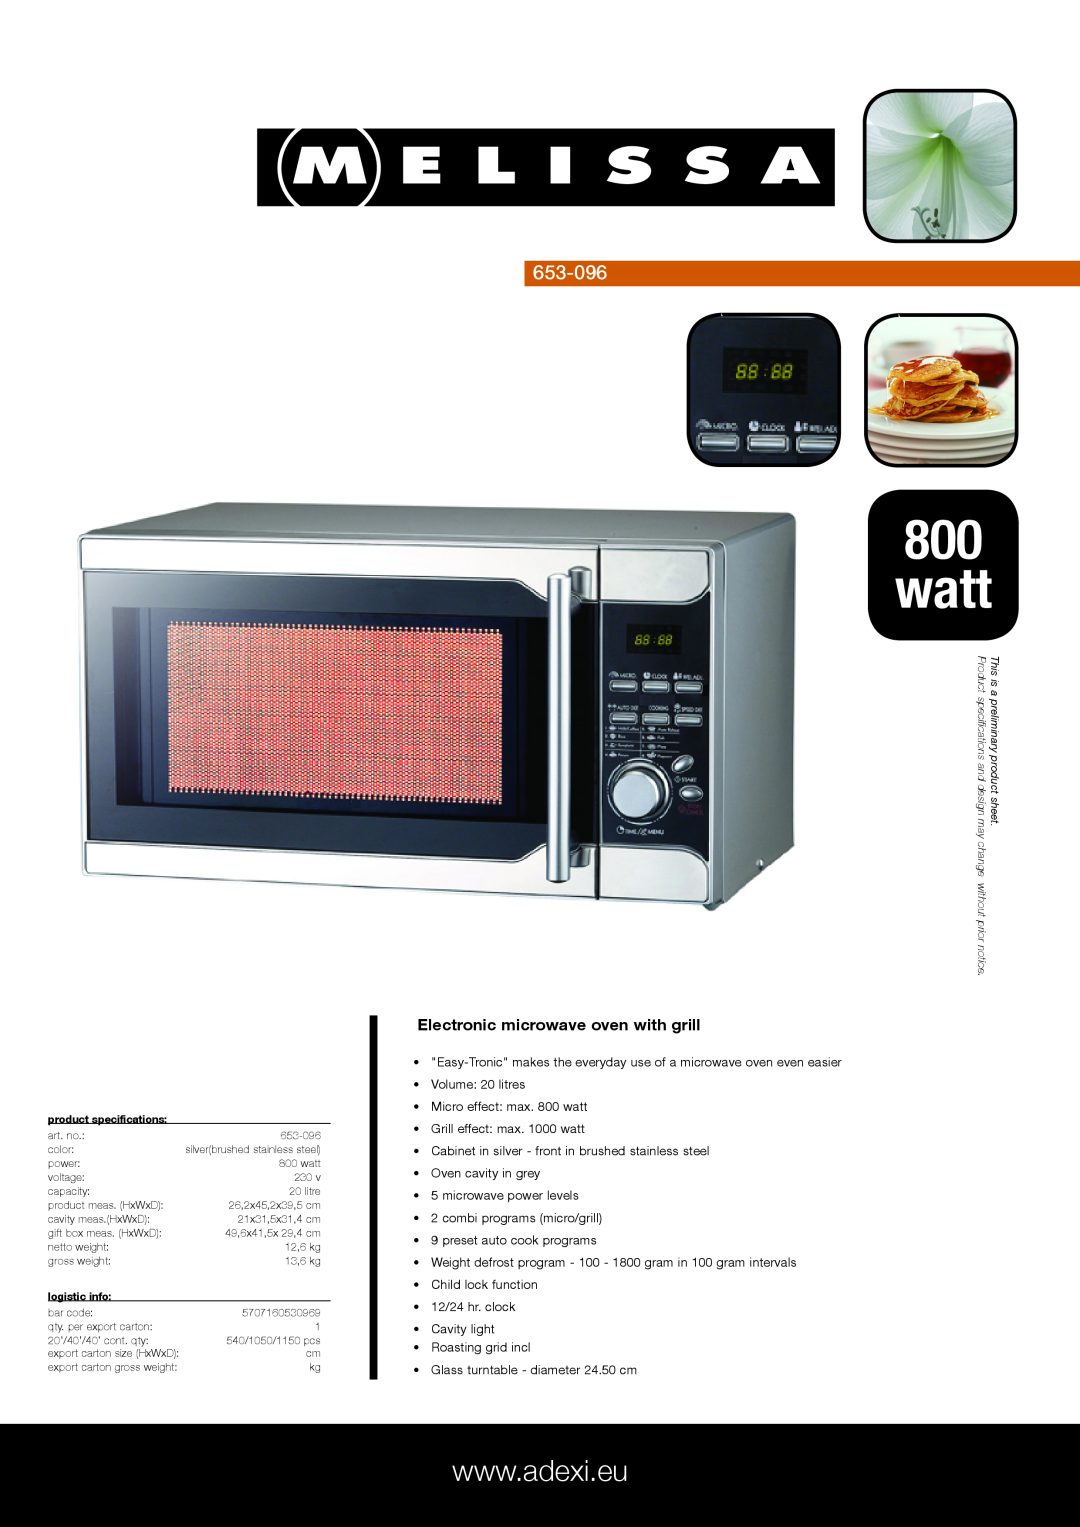 Melissa 653-096 specifications watt, Electronic microwave oven with grill 